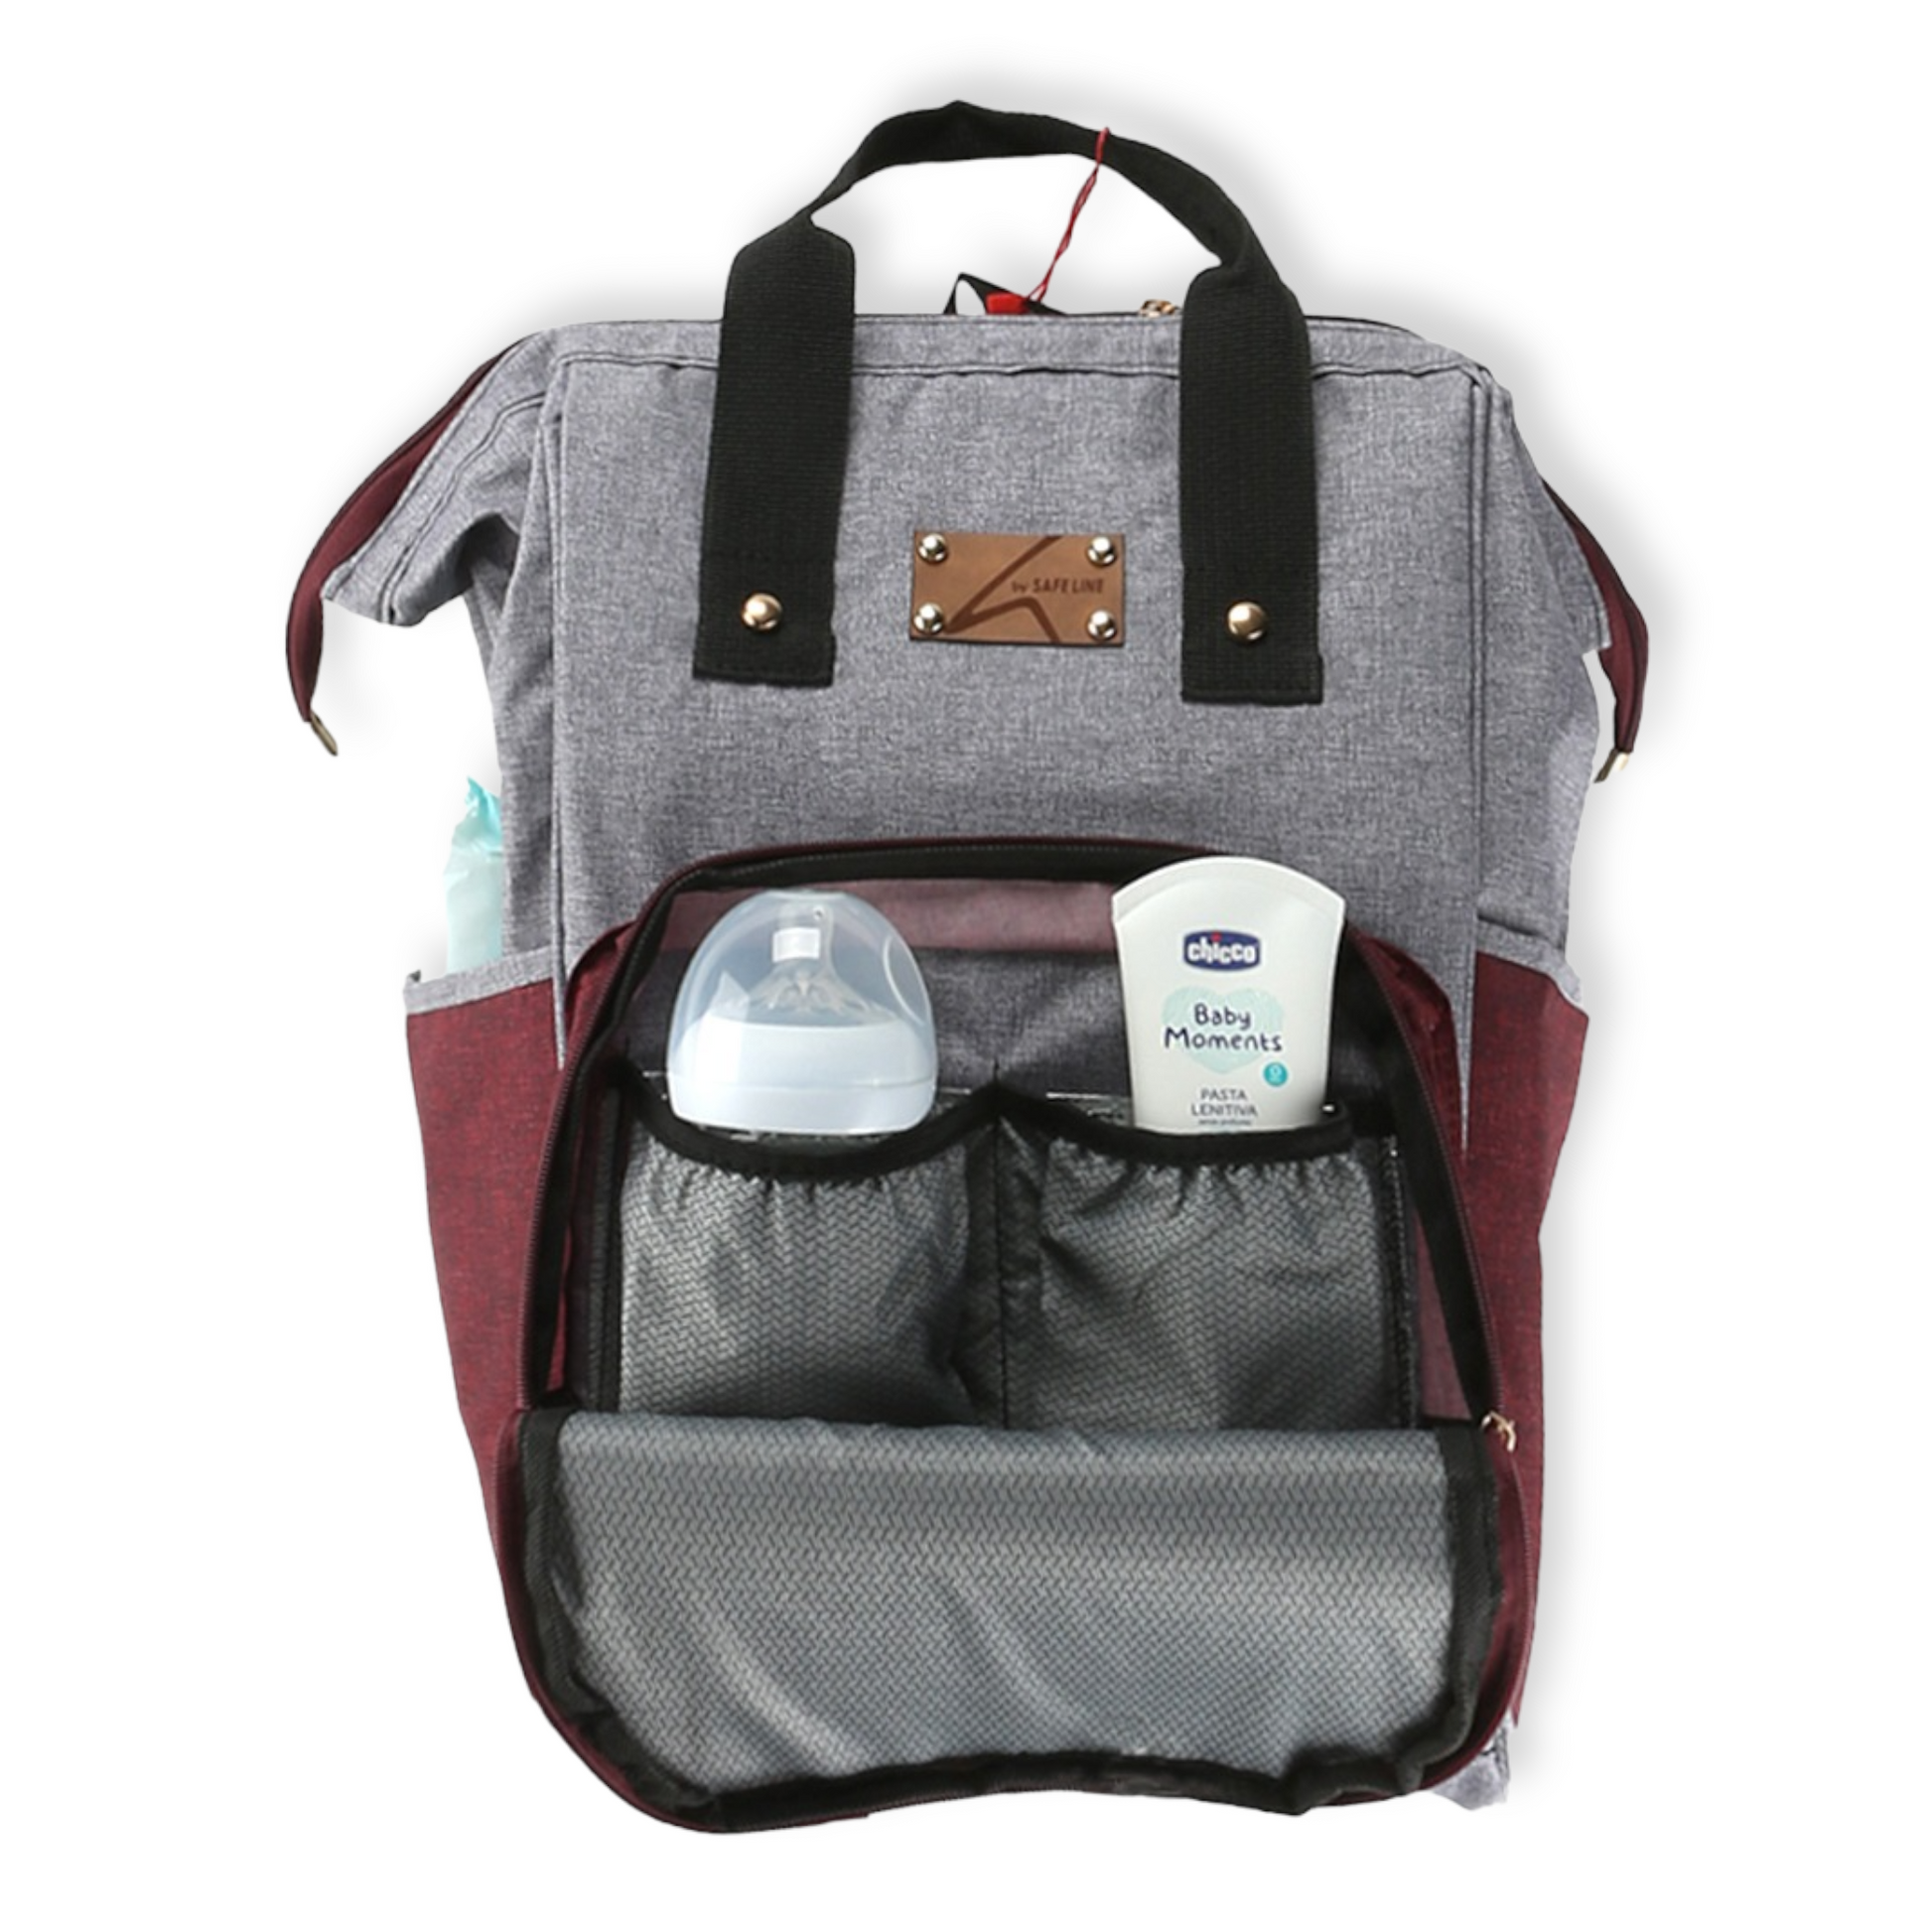 Burgundy and Grey Mommy Bag-Bag, Bags, Burgundy, catbabygear, catbag, Changing, Diapers, Grey, Maternity, Nappy, Nursery, Travel-Safe Line-[Too Twee]-[Tootwee]-[baby]-[newborn]-[clothes]-[essentials]-[toys]-[Lebanon]